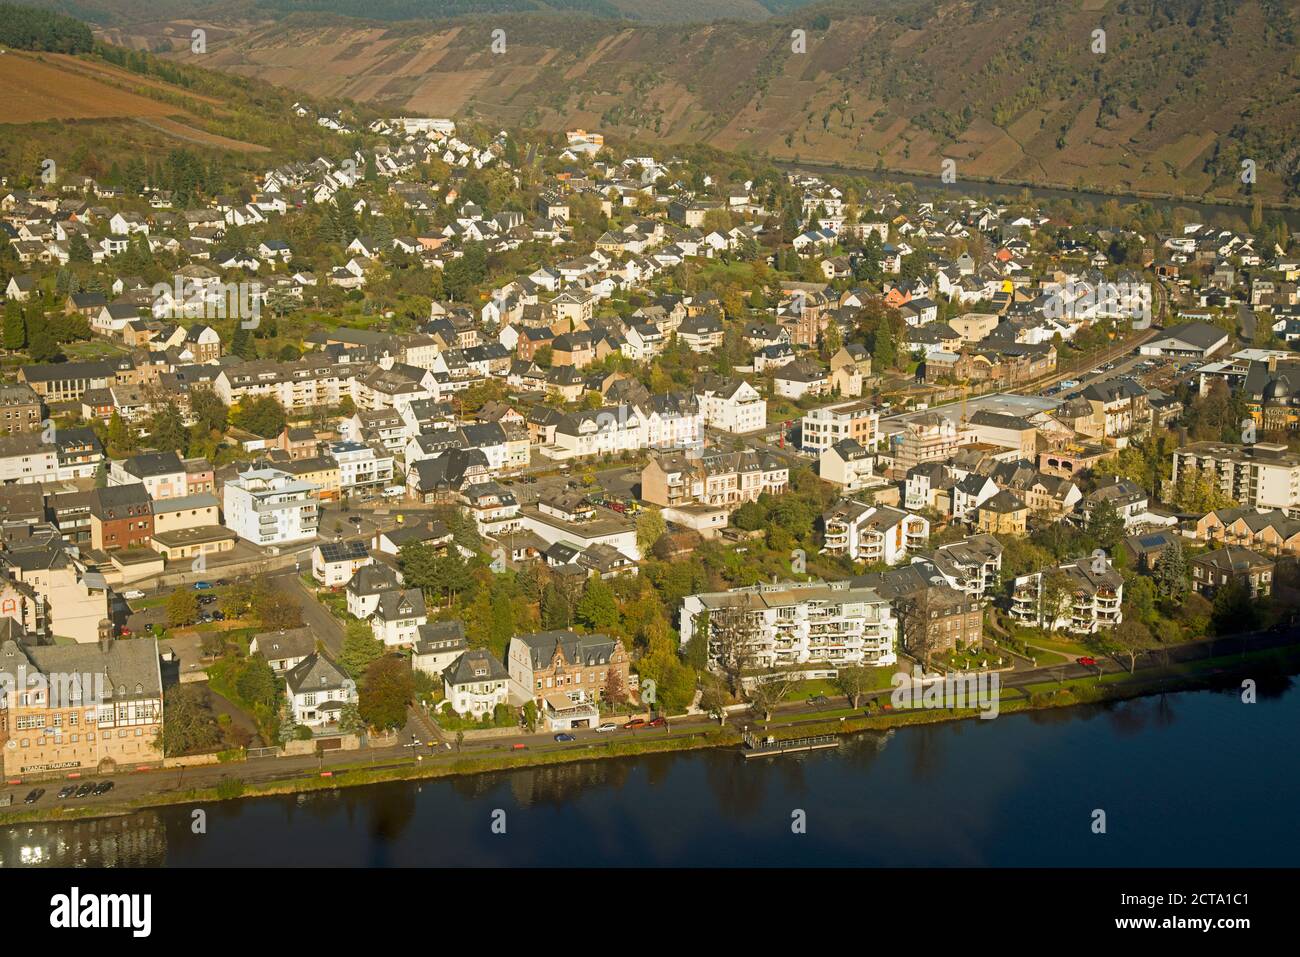 Germany, Rhineland-Palatinate, Moselle valley, Traben-Trarbach, Moselle river Stock Photo